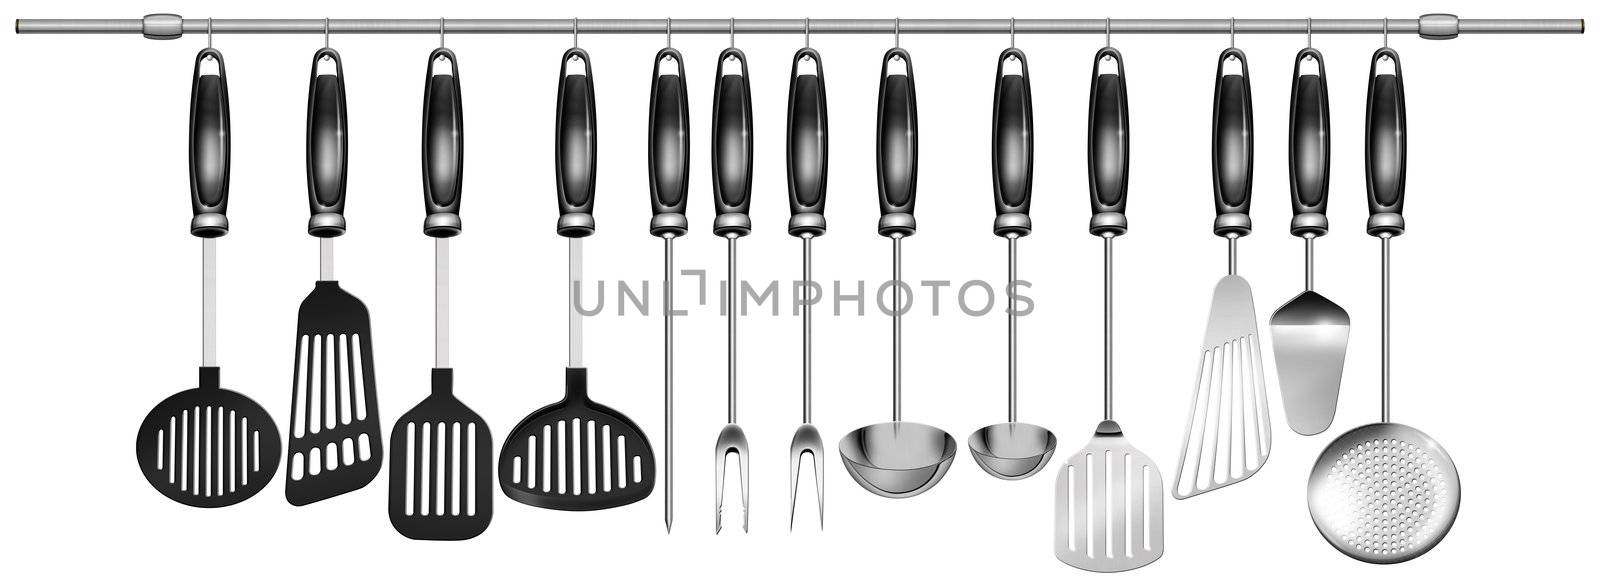 Illustration with 13 kitchen utensils hanging on steel pole on a white background